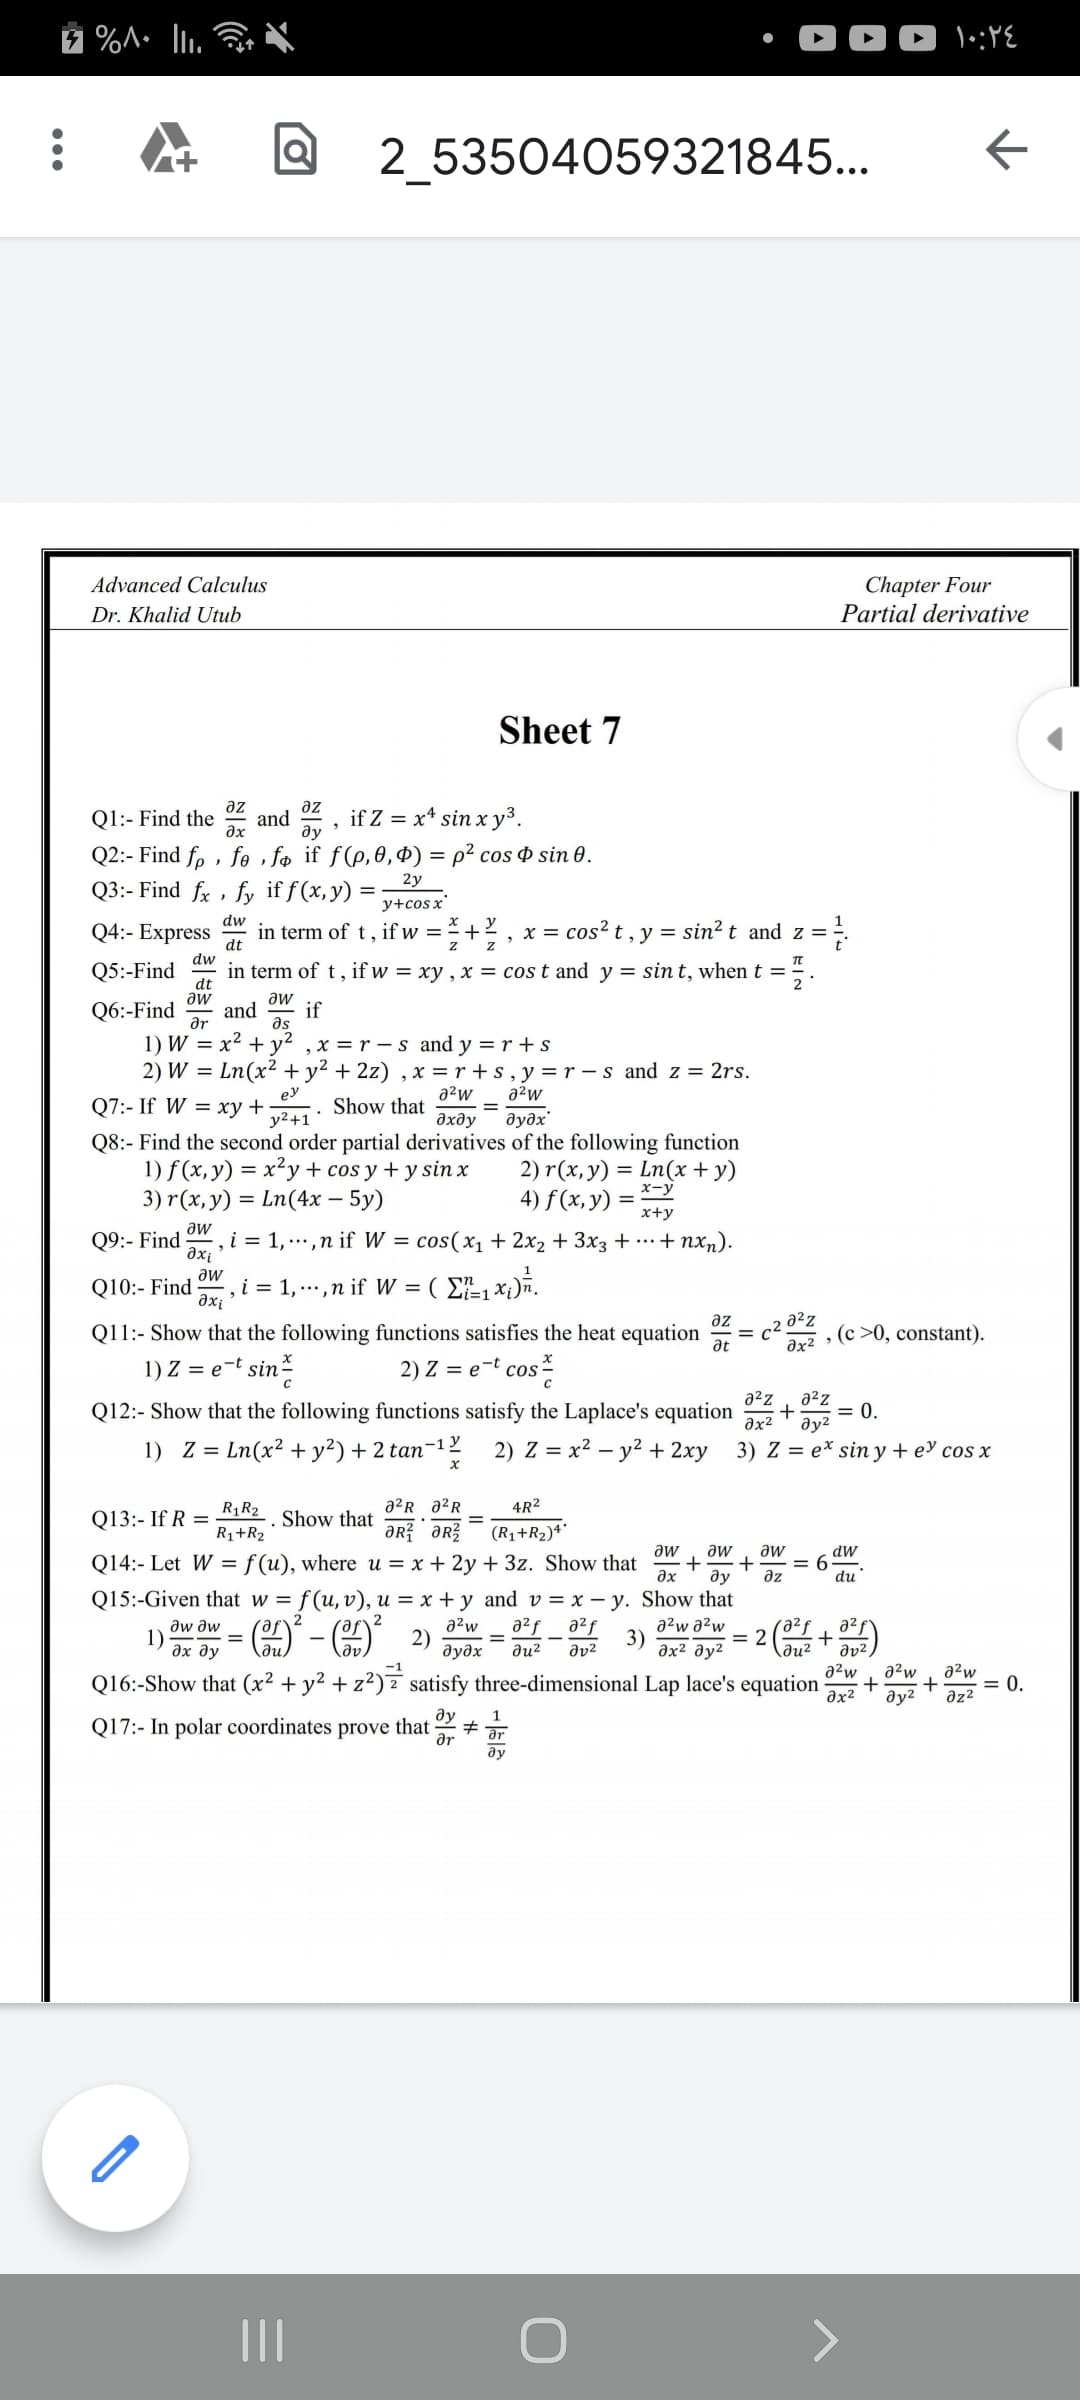 00 \:YE
2 53504059321845...
Chapter Four
Partial derivative
Advanced Calculus
Dr. Khalid Utub
Sheet 7
az
Q1:- Find the
az
and
ax
if Z = x* sin x y³.
ду
Q2:- Find fp , fe , fo if ƒ(p,0,Ð) = p² cos ¤ sin 0.
2у
Q3:- Find fx , fy if f(x,y) =
y+cos x'
dw
Q4:- Express
in term of t , if w =
+
x = cos? t , y = sin² t and z = ÷.
dt
dw
in term of t, if w = xy , x = cos t and y = sin t, when t =
Q5:-Find
dt
aw
Q6:-Find
aw
and
ar
if
as
1) W = x²
2) W
x = r -s and y = r +s
+ y
Ln(x² + y2 + 2z) , x = r +s, y=r – s and z = 2rs.
ey
a2w
a2w
Q7:- If W = xy +
y2+1'
Show that
%D
дхду
дудх
Q8:- Find the second order partial derivatives of the following function
1) f (x, y) = x²y + cos y + y sin x
3) r (х, у) 3D Ln(4х — 5у)
= Ln(x + y)
x-y
2) r(x,y)
4) f(x, y)
x+y
aw
Q9:- Find
i = 1, ... ,n if W = cos(x1 + 2x2 + 3x3 + …+ nxn).
axi
1
aw
Q10:- Find
,i = 1, ...,n if W = ( E1xi)ñ.
a²z
, (c >0, constant).
az
Q11:- Show that the following functions satisfies the heat equation
at
c².
əx²
1) Z = e-t sin-
2) Z = e-t cos-
a2z
a2z
Q12:- Show that the following functions satisfy the Laplace's equation
+
= 0.
Əx2
ду?
1) Z = Ln(x² + y²) + 2 tan-12
2) Z = x2 – y² + 2xy 3) Z = e* sin y + e cos x
R1R2
a?R a2R
4R2
Q13:- If R =
. Show that
R1+R2
ƏR ər?
(R1+R2)**
aw
Q14:- Let W =f(u), where u = x + 2y + 3z. Show that
aw
aw
= 6
az
dw
ду
du
Q15:-Given that w = f(u,v), u = x + y and v = x – y. Show that
a²w
2)
дудх
a2f
a2f
aw aw
1)
дх ду
a2w a2w
3)
дх2 ду?
a²f
+
ди?
= 2
ди?
dv²
a²w
a2w
Q16:-Show that (x² + y² + z²) z satisfy three-dimensional Lap lace's equation
əx2
a2w
= 0.
əz2
ду?
ду
1
Q17:- In polar coordinates prove that
ar
II
